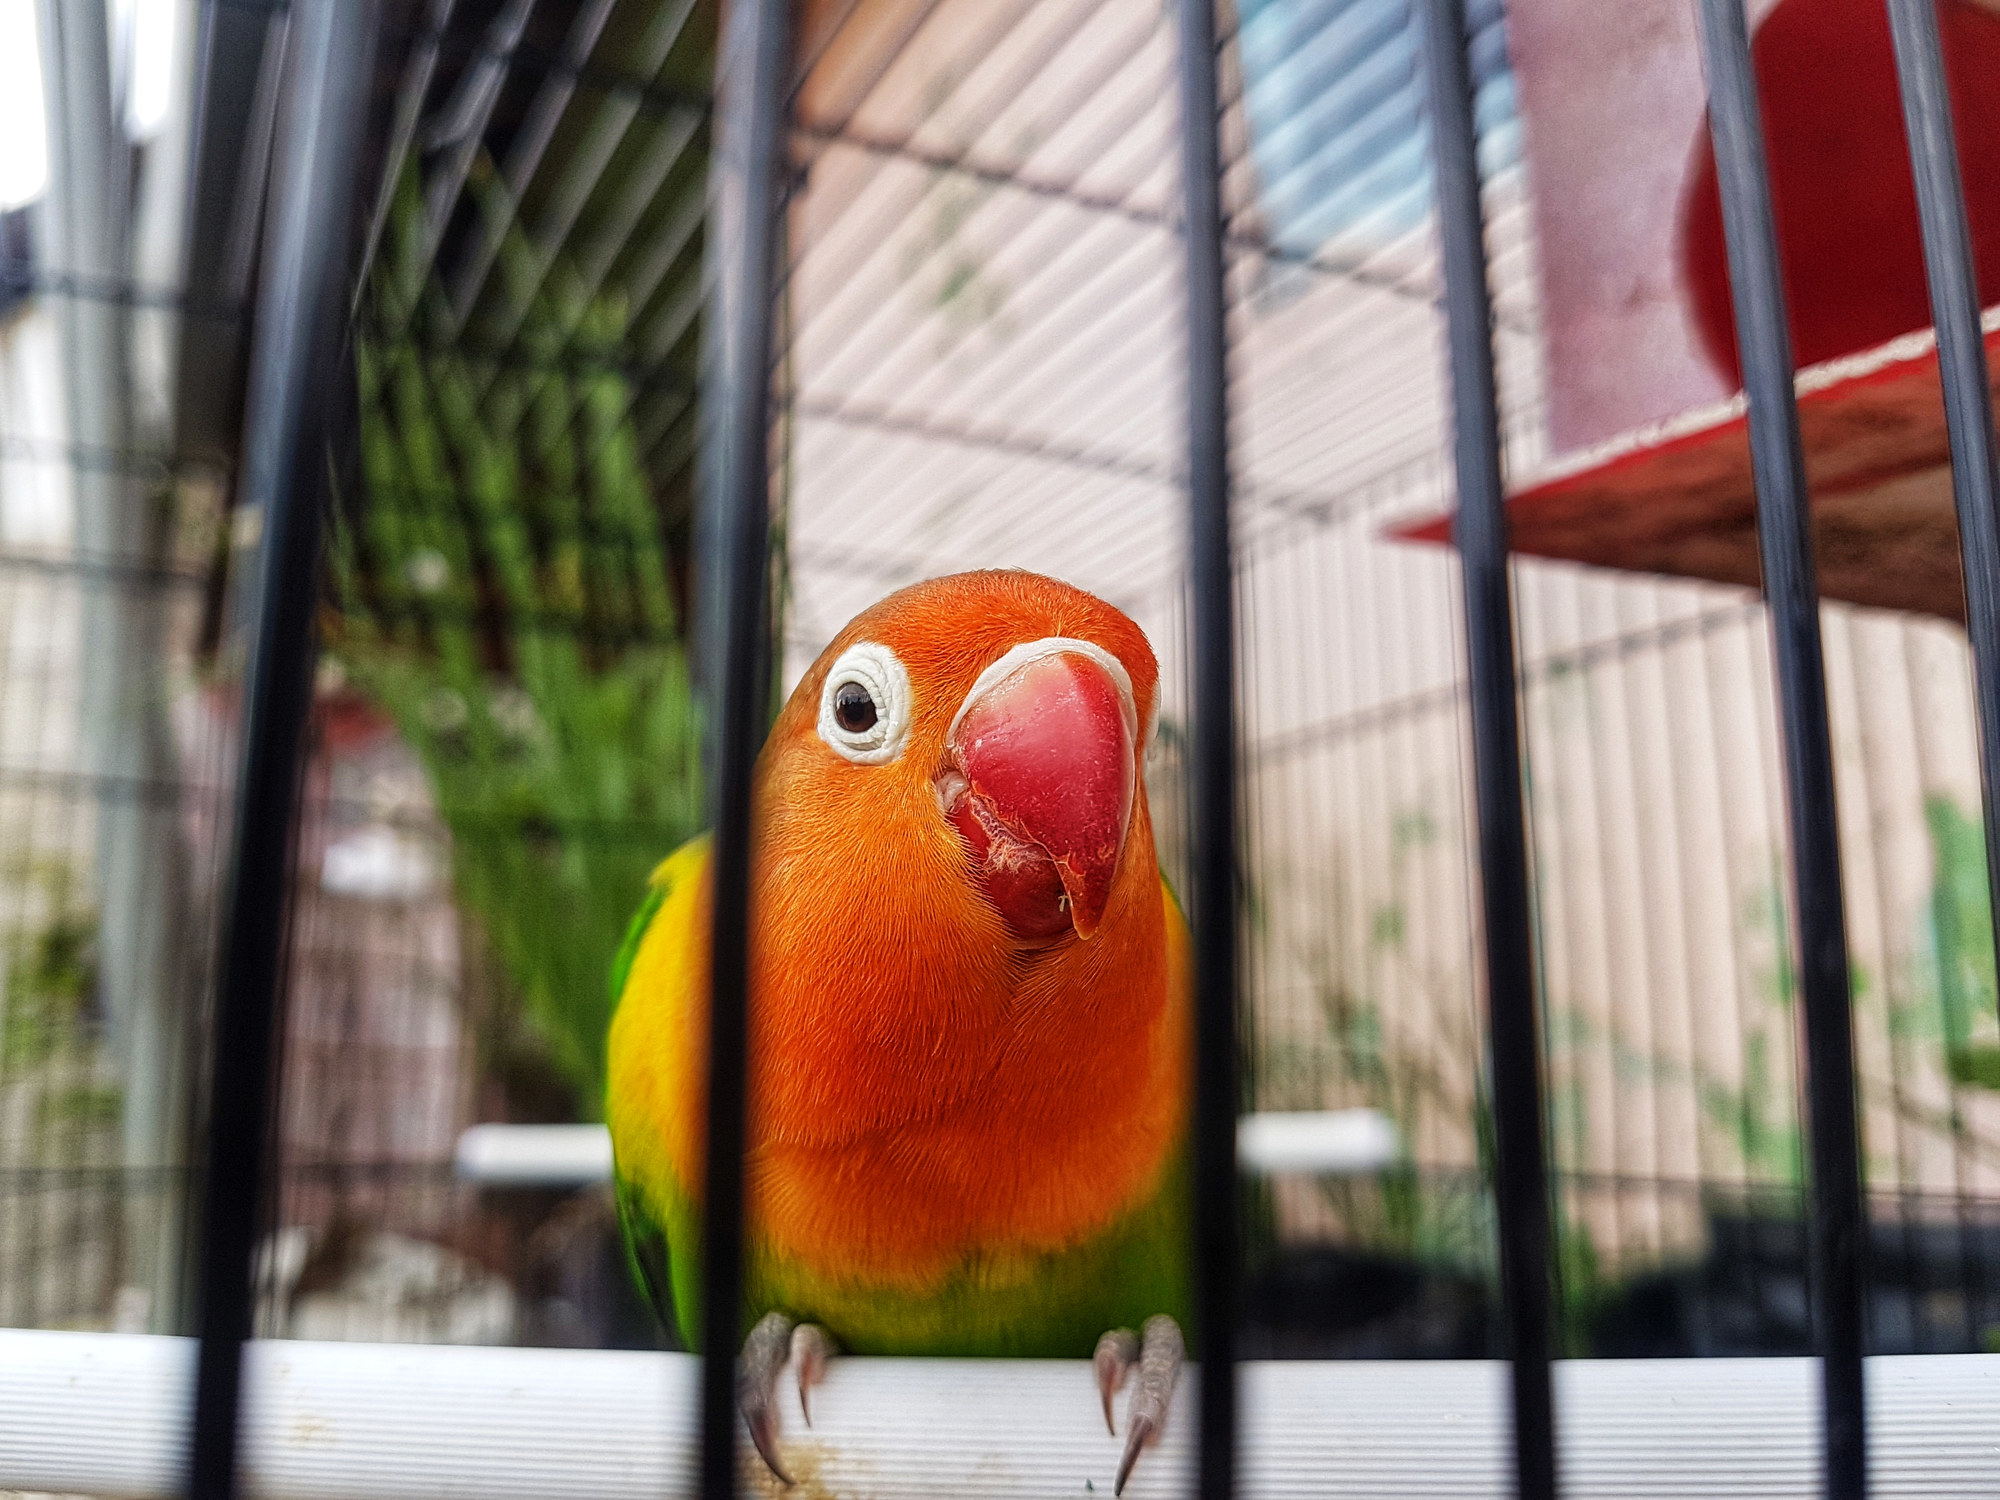 A colorful bird in a cage.